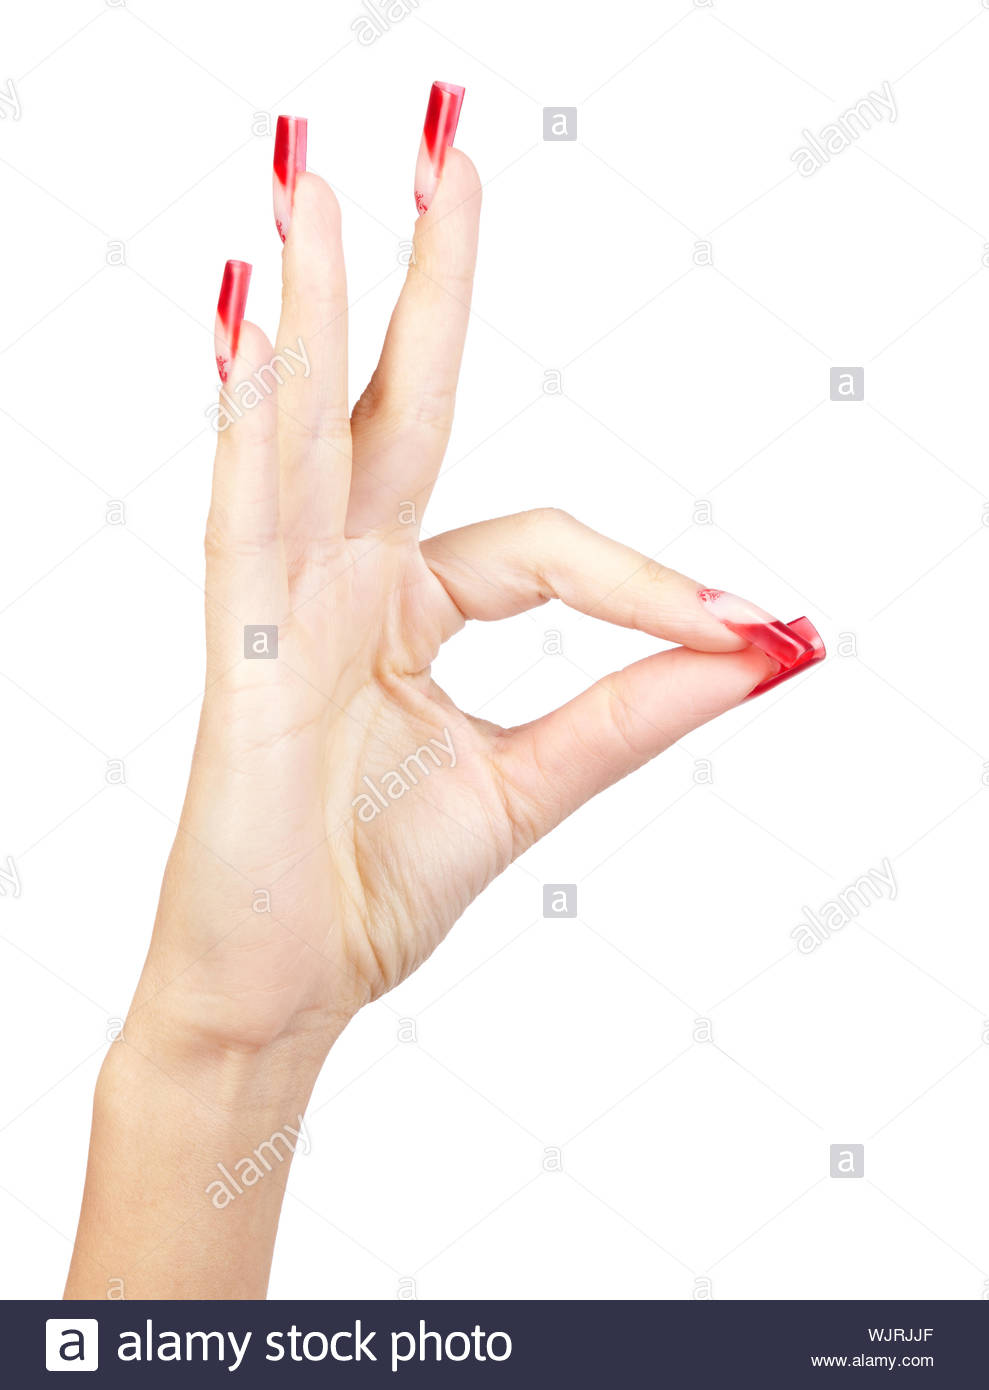 Hand With Red French Acrylic Nails Manicure And Painting Isolated White Background Stock Photo Alamy